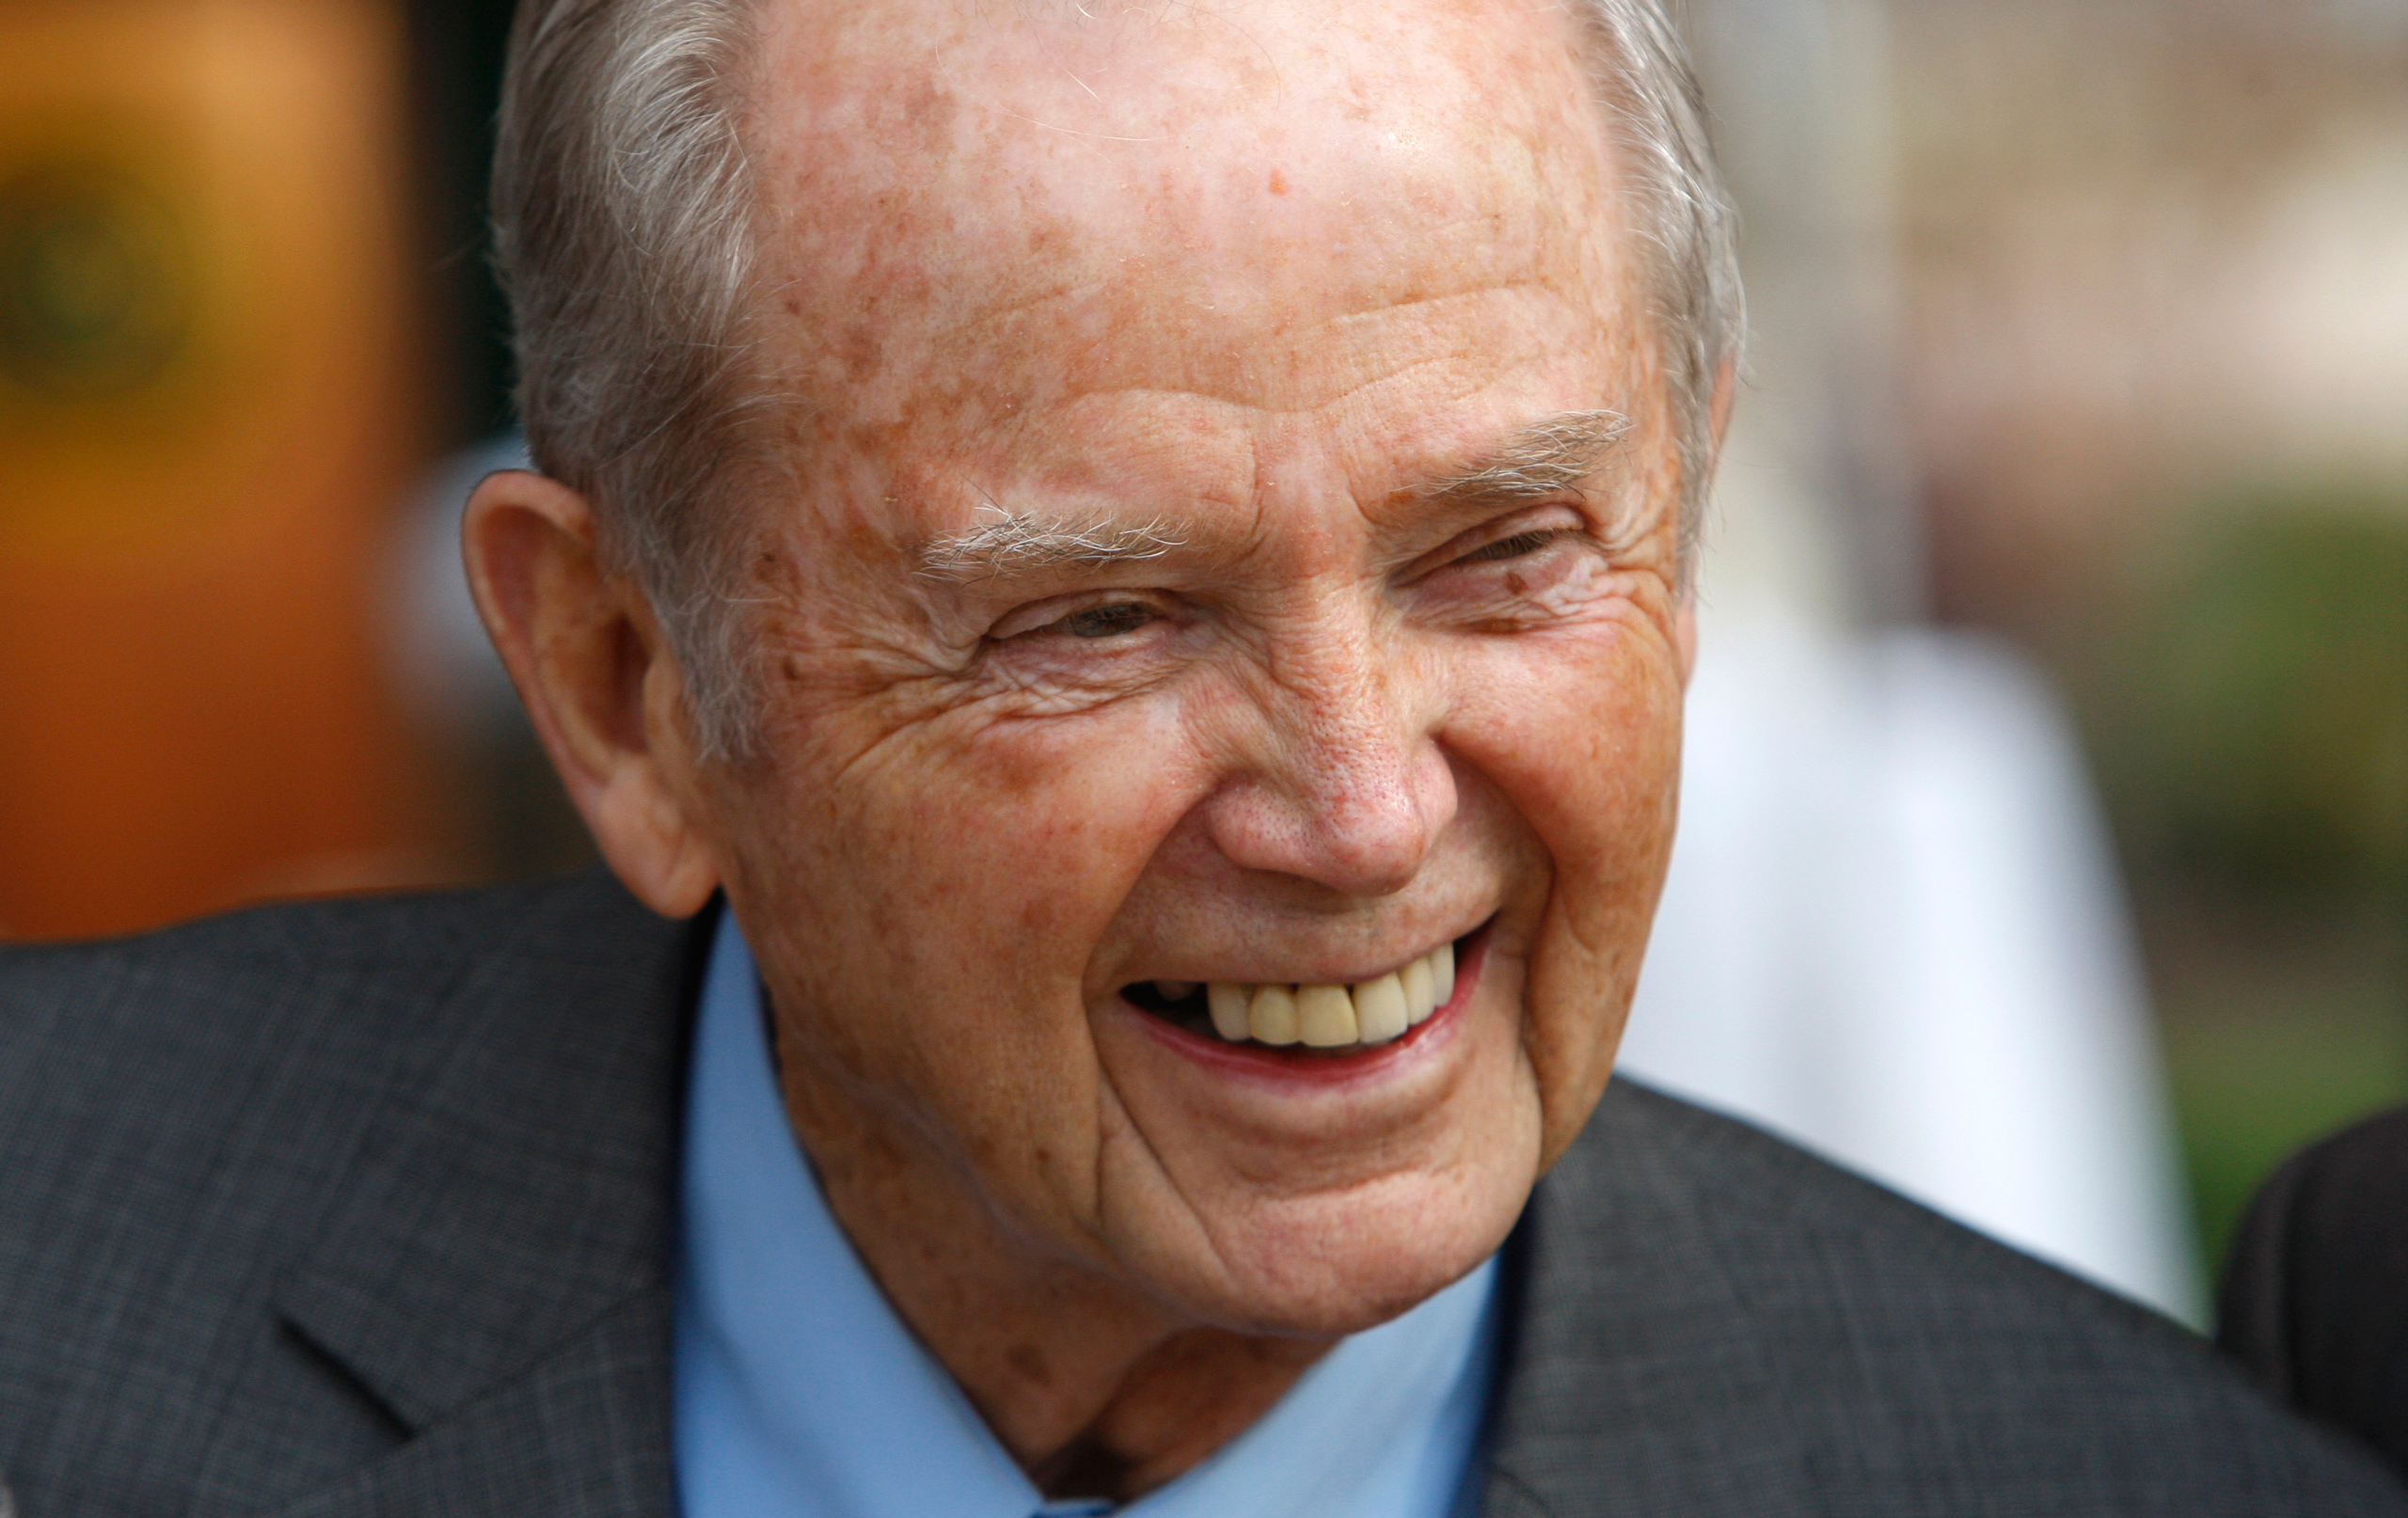 Former Michigan Gov. William Milliken is seen before the dedication of the William G. Milliken State Park &amp; Harbor, Thursday, Oct. 22, 2009 in Detroit. (AP Photo/Carlos Osorio)